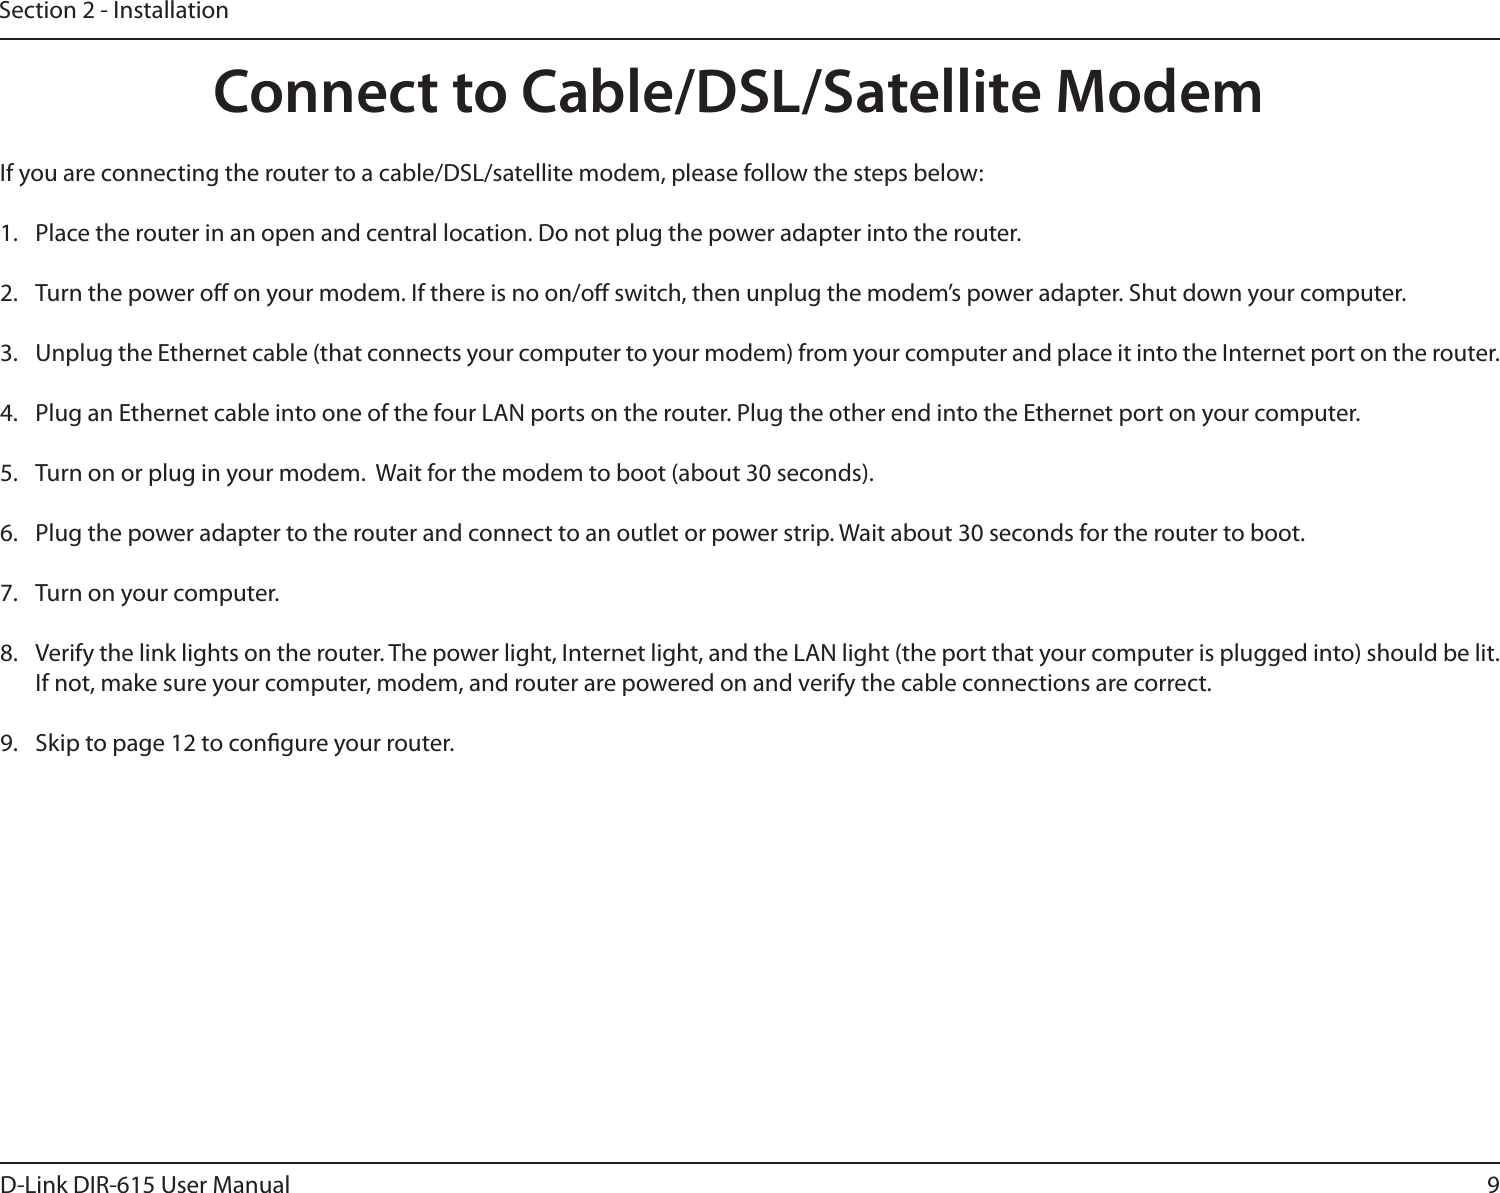 9D-Link DIR-615 User ManualSection 2 - InstallationIf you are connecting the router to a cable/DSL/satellite modem, please follow the steps below:1.  Place the router in an open and central location. Do not plug the power adapter into the router. 2.  Turn the power o on your modem. If there is no on/o switch, then unplug the modem’s power adapter. Shut down your computer.3.  Unplug the Ethernet cable (that connects your computer to your modem) from your computer and place it into the Internet port on the router.  4.  Plug an Ethernet cable into one of the four LAN ports on the router. Plug the other end into the Ethernet port on your computer.5.  Turn on or plug in your modem.  Wait for the modem to boot (about 30 seconds). 6.  Plug the power adapter to the router and connect to an outlet or power strip. Wait about 30 seconds for the router to boot. 7.  Turn on your computer. 8.  Verify the link lights on the router. The power light, Internet light, and the LAN light (the port that your computer is plugged into) should be lit. If not, make sure your computer, modem, and router are powered on and verify the cable connections are correct. 9.  Skip to page 12 to congure your router. Connect to Cable/DSL/Satellite Modem